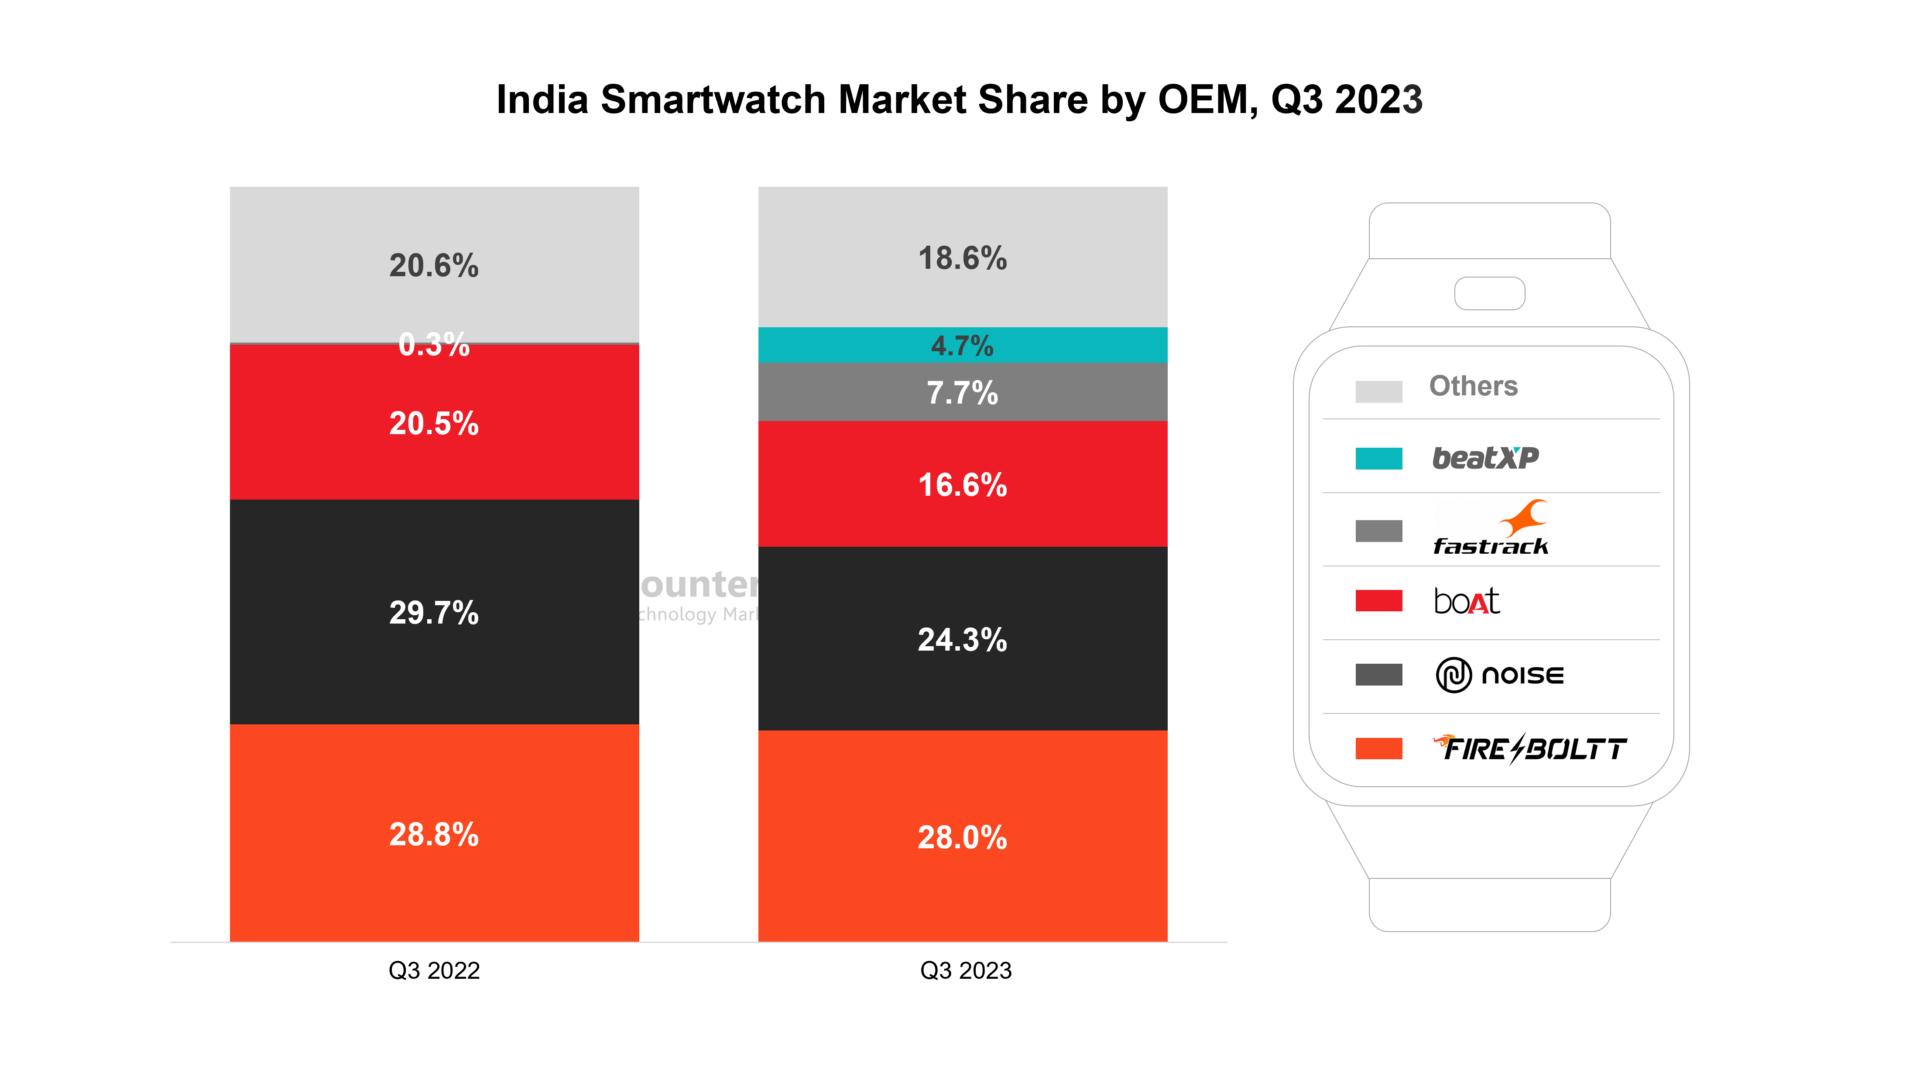 A chart showing the Smartphone Market Share by OEM Q3 2023 in India